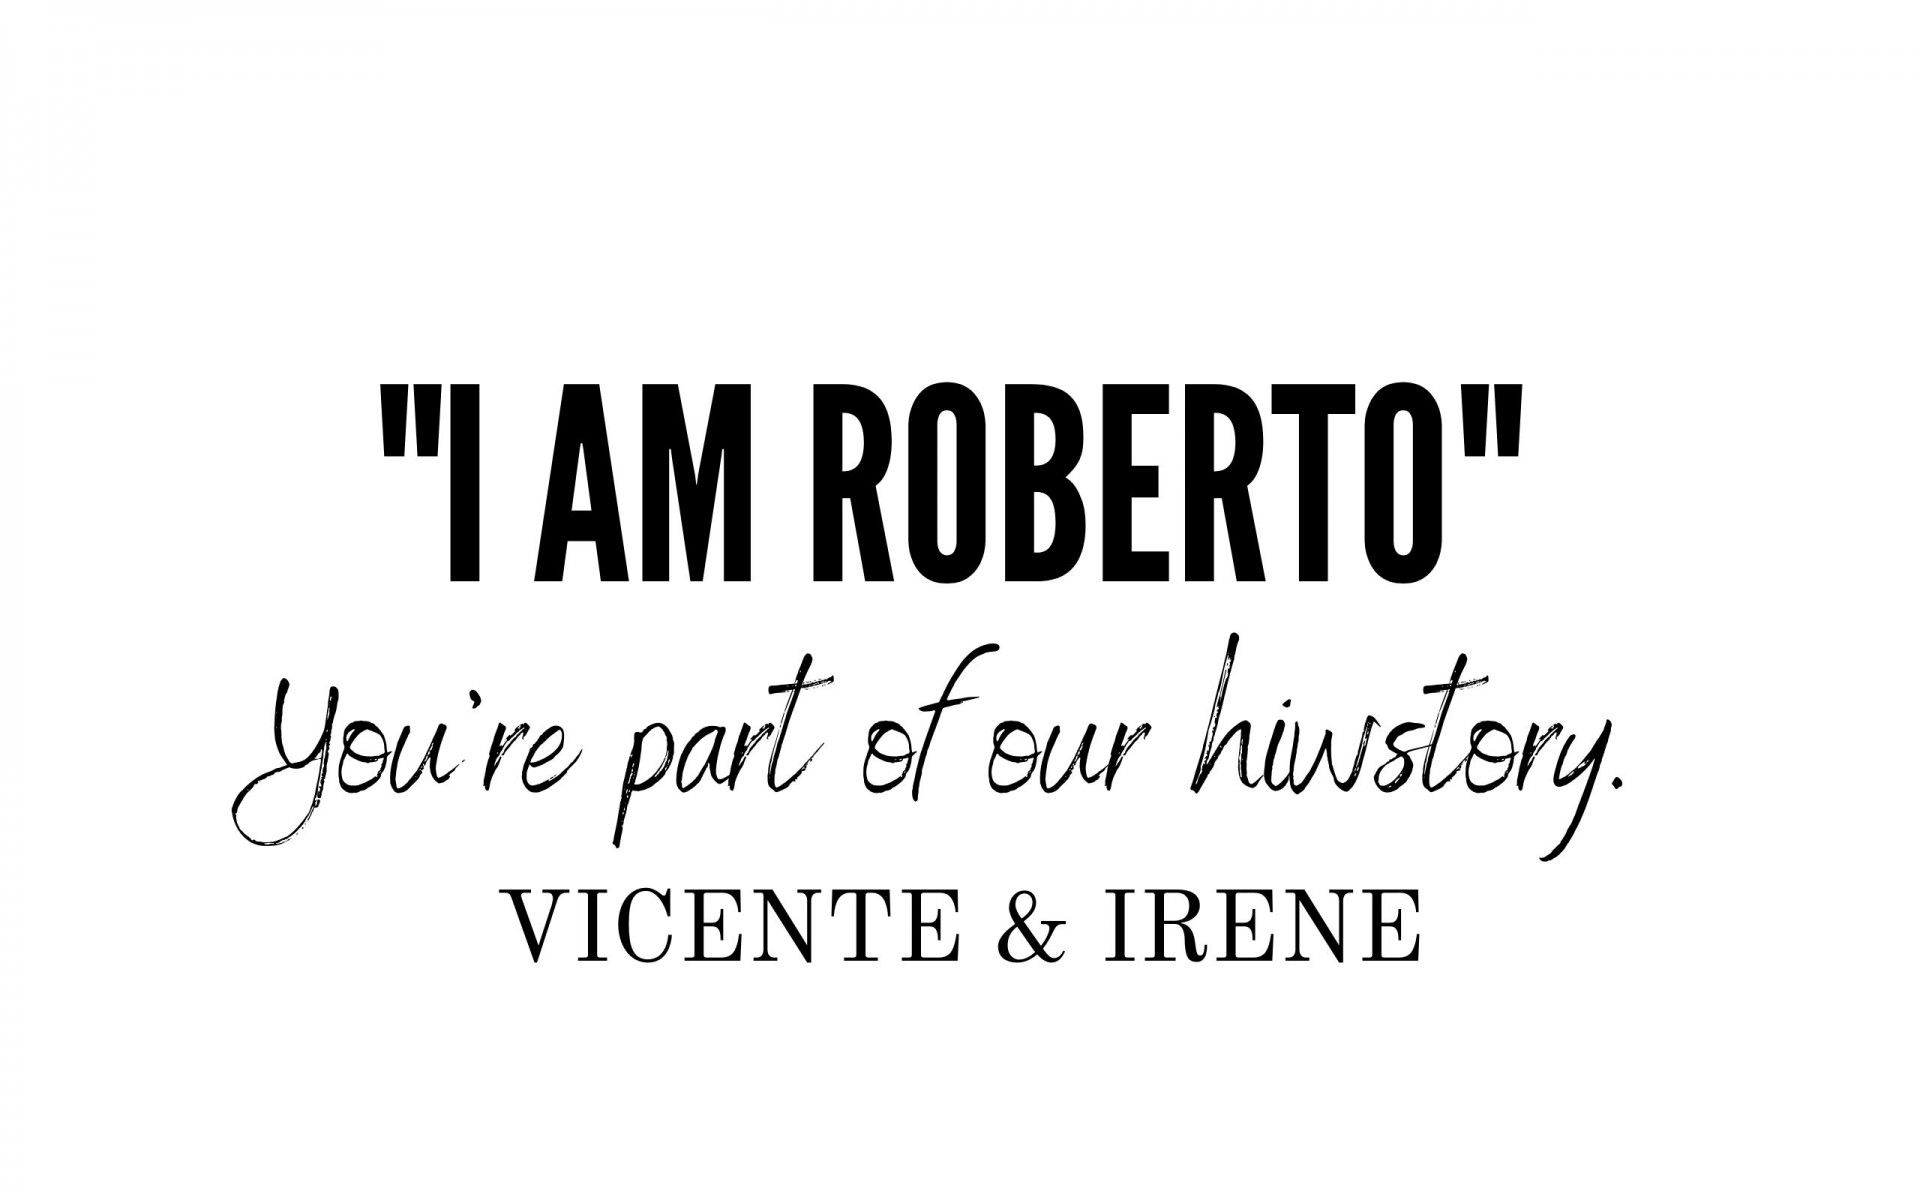 You are part of our history - Vicente & Irene